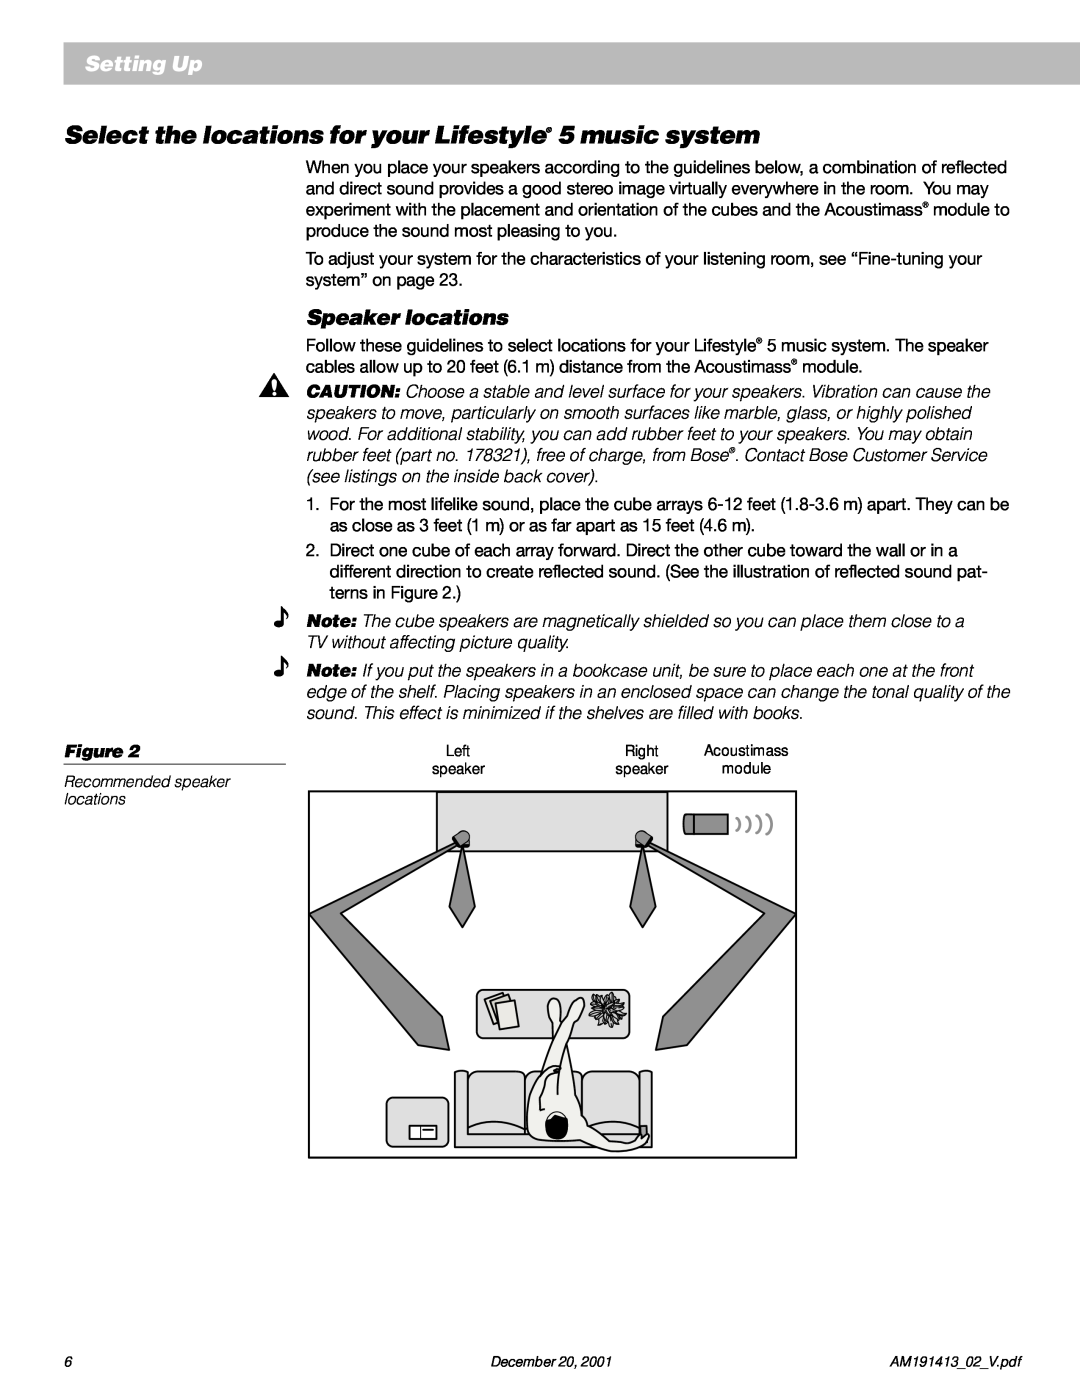 Bose 5 manual Setting Up, Speaker locations, Recommended speaker locations 